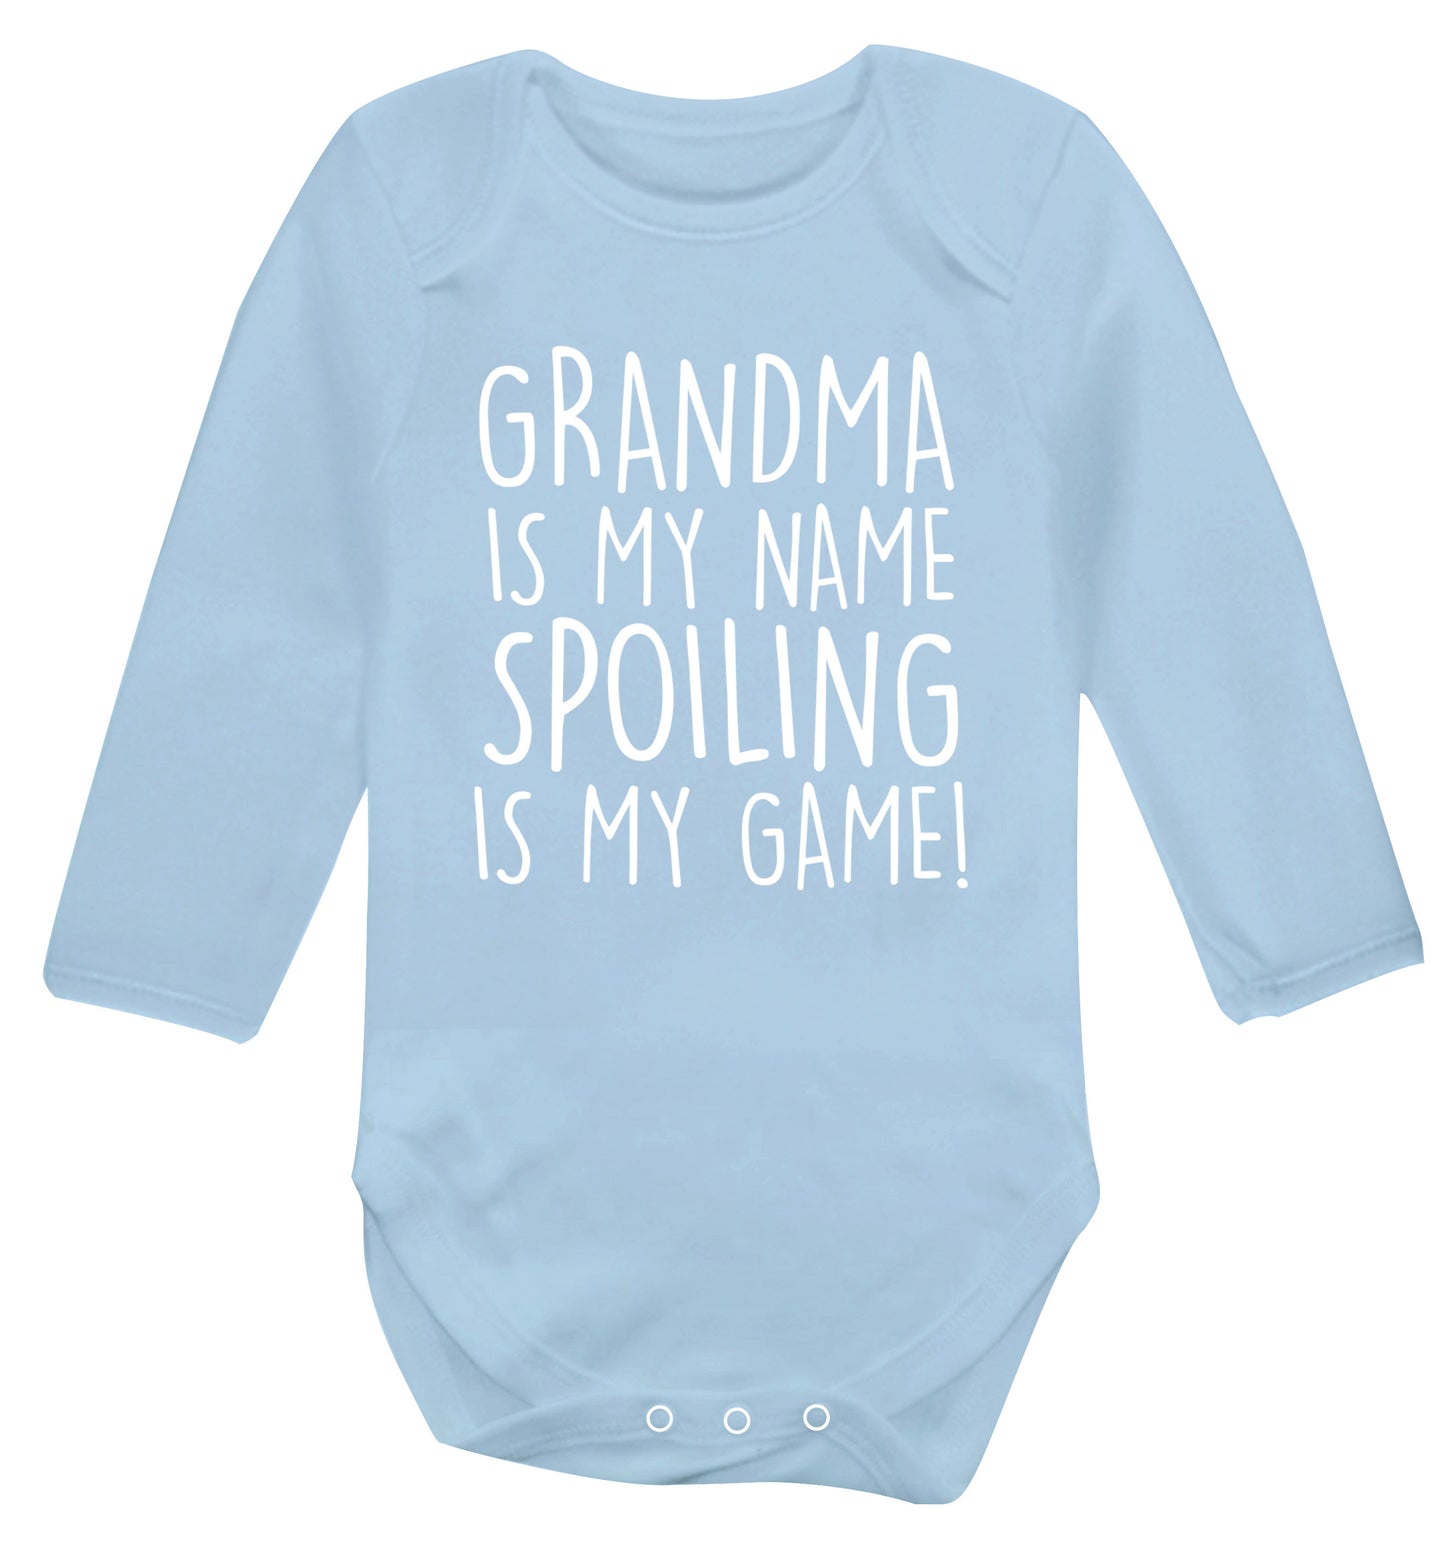 Grandma is my name, spoiling is my game Baby Vest long sleeved pale blue 6-12 months